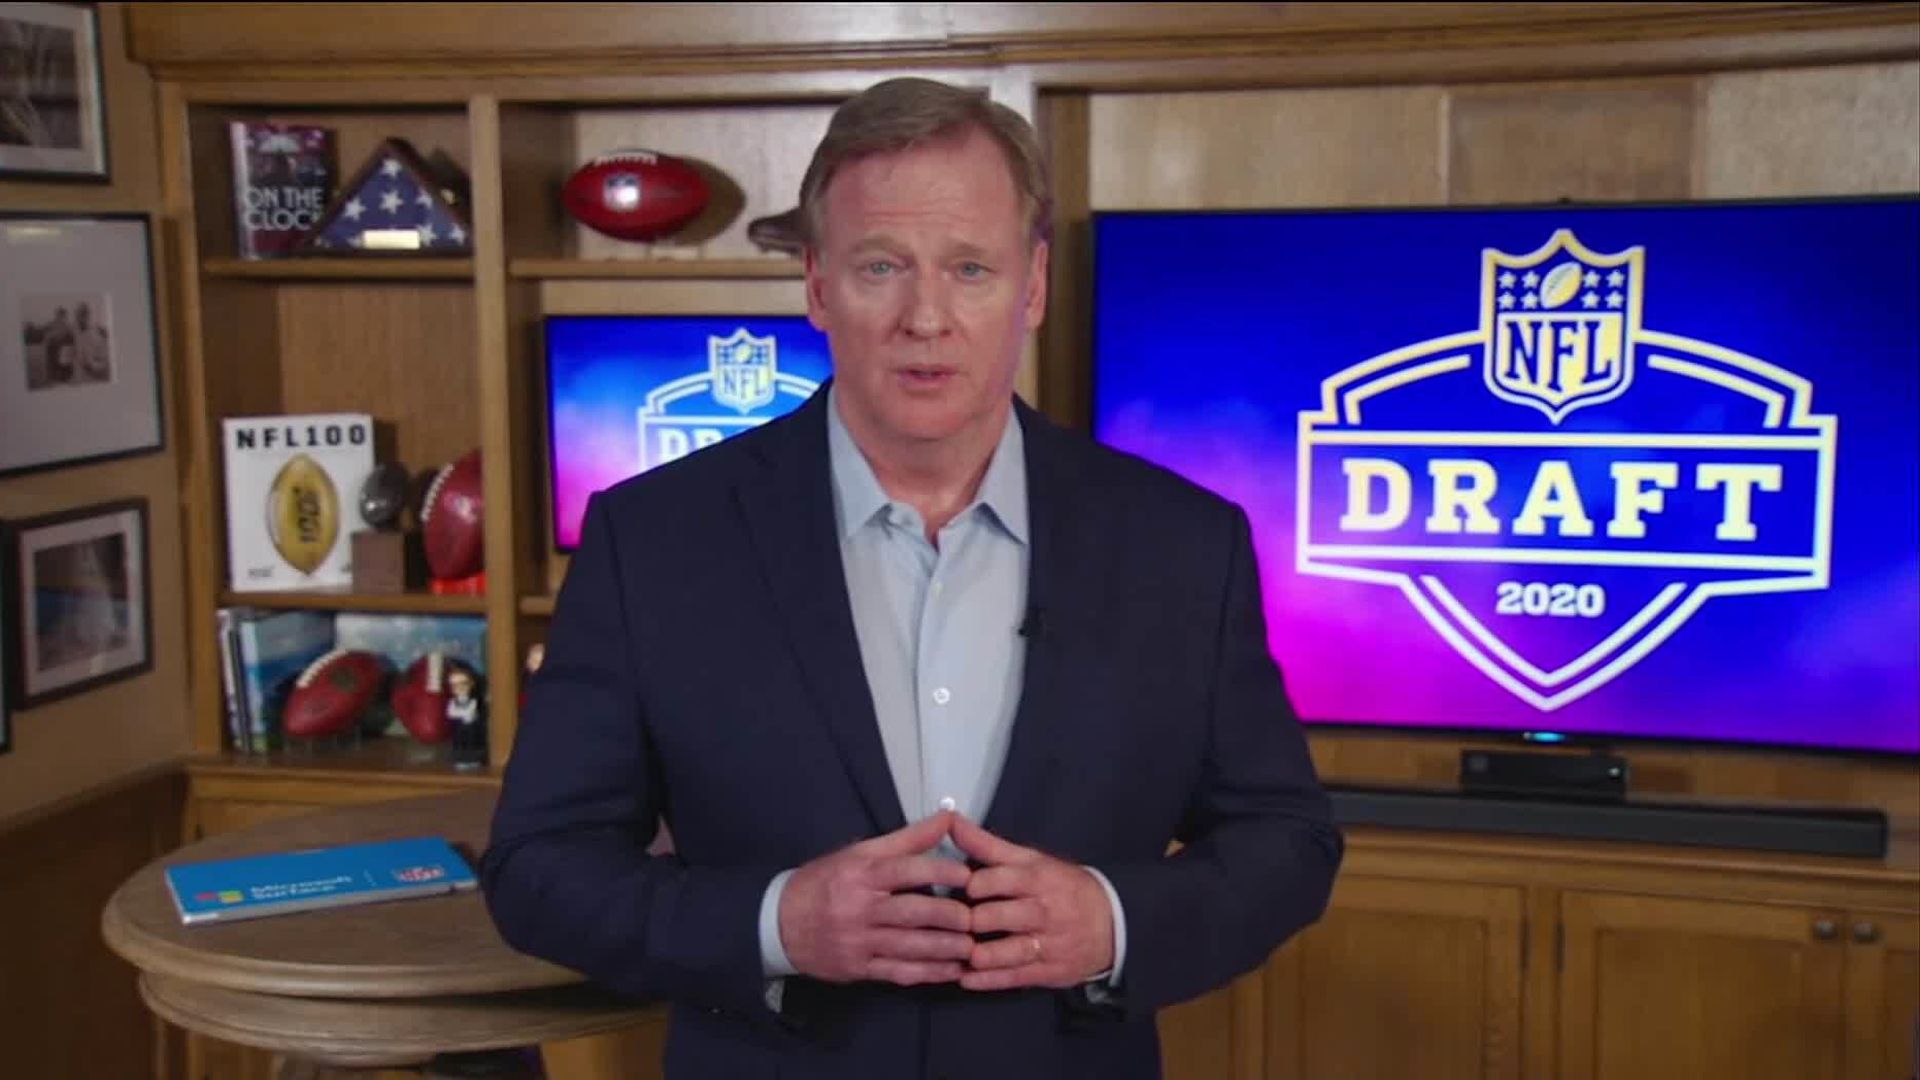 NFL commissioner Roger Goodell announced the picks from his basement in Bronxville, New York.